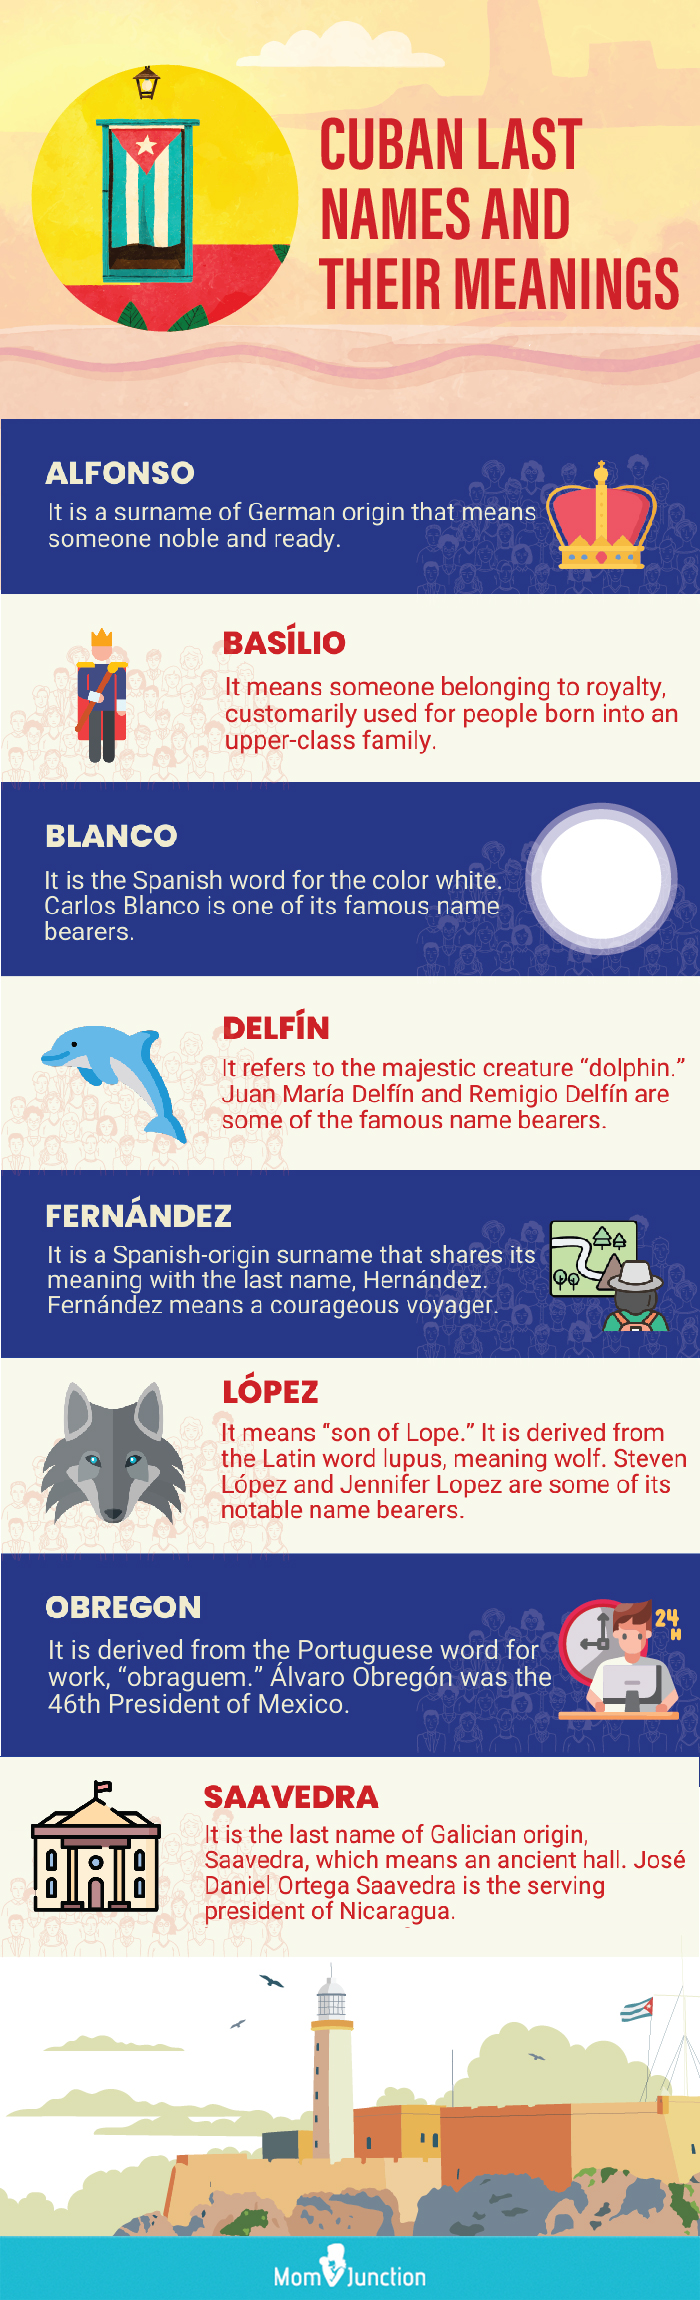 cuban last names with meanings [infographic]